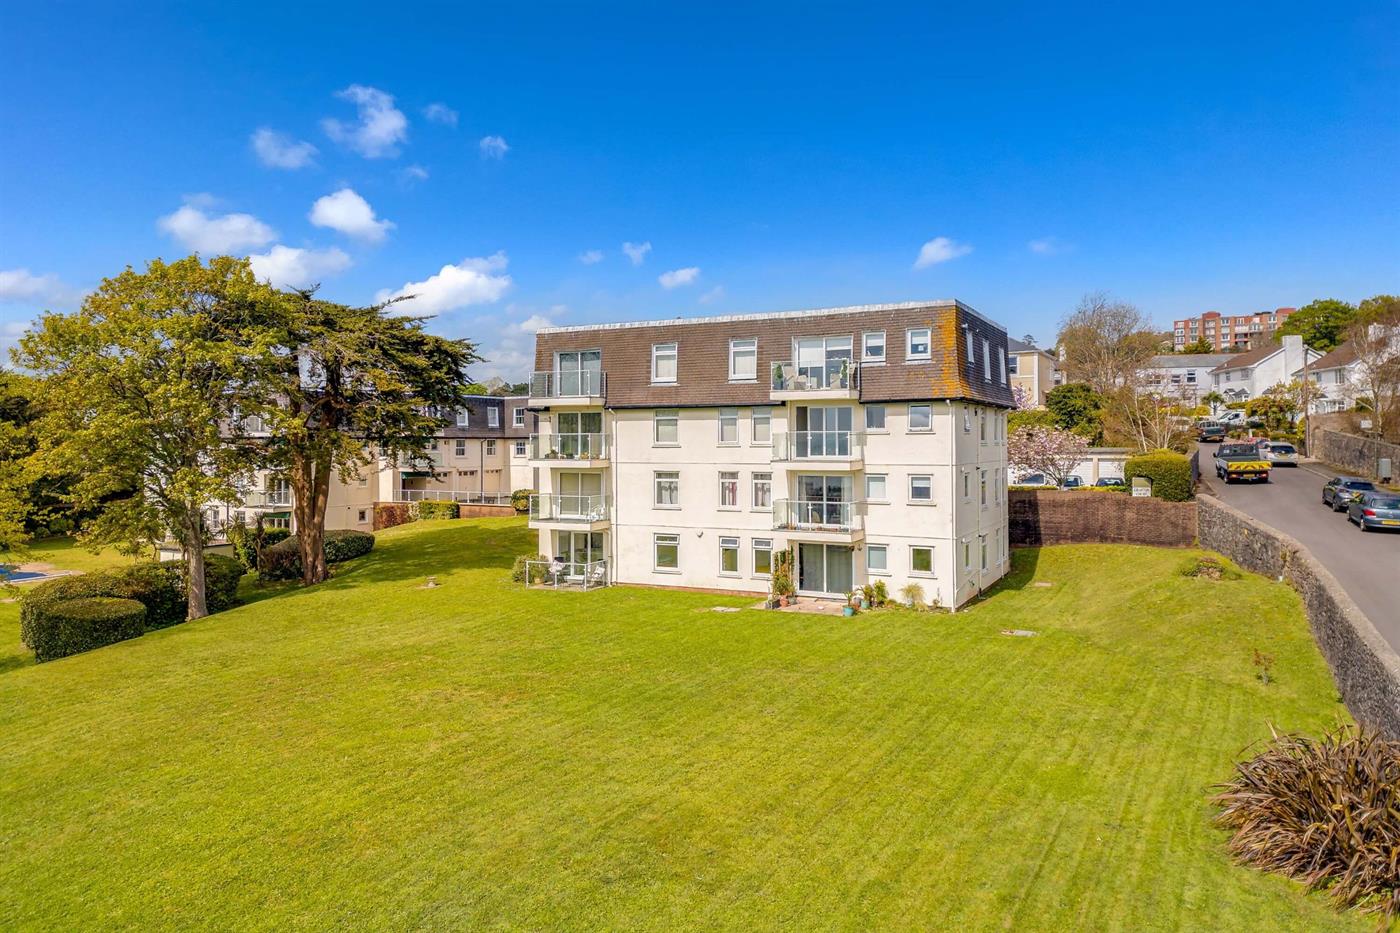 2 Bedroom Apartment for Sale: Grafton Court, Grafton Road, Torquay, TQ1 1UP